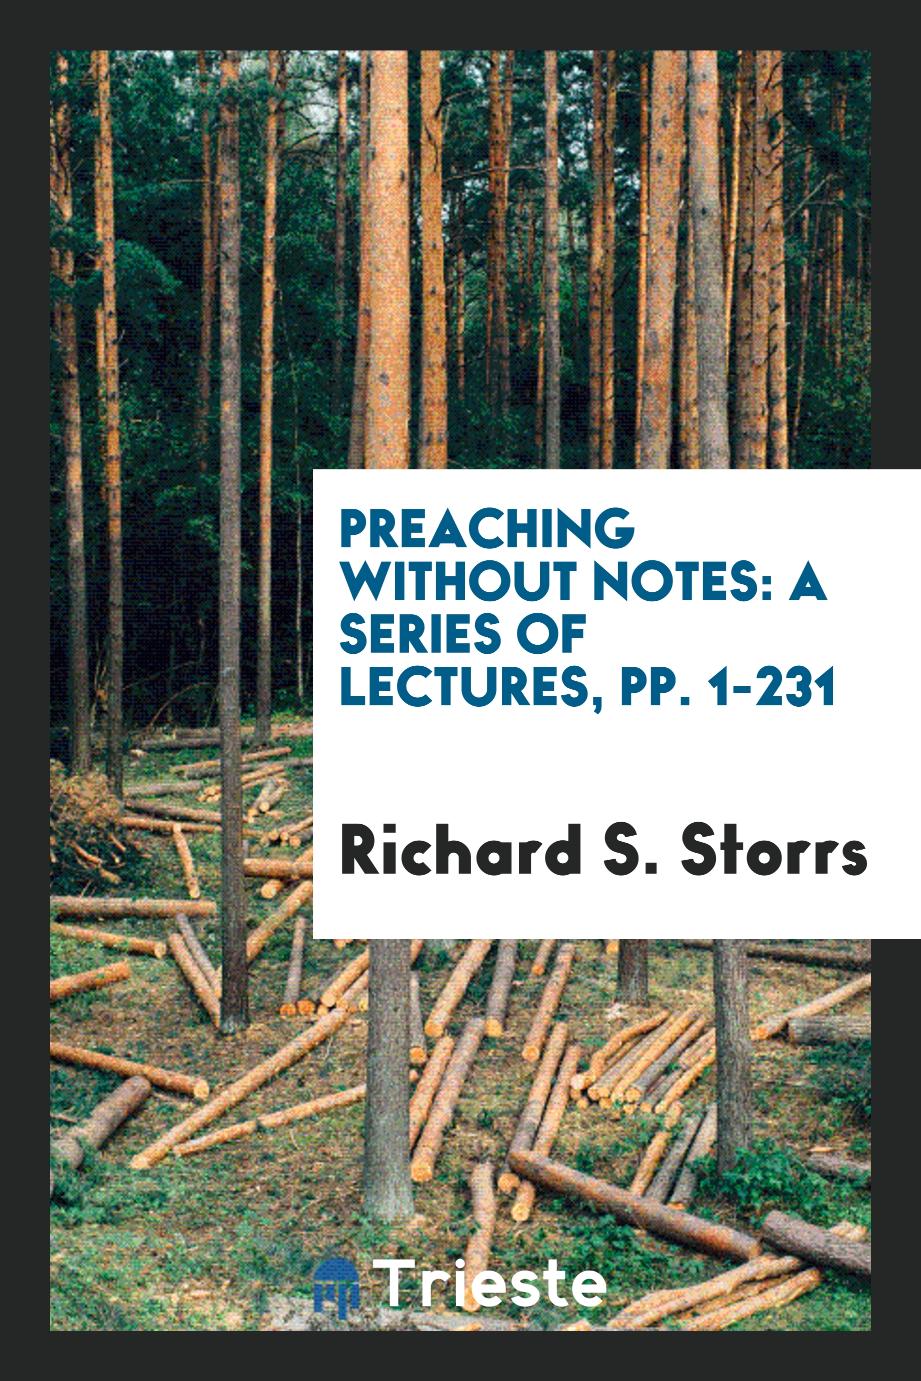 Preaching Without Notes: A Series of Lectures, pp. 1-231